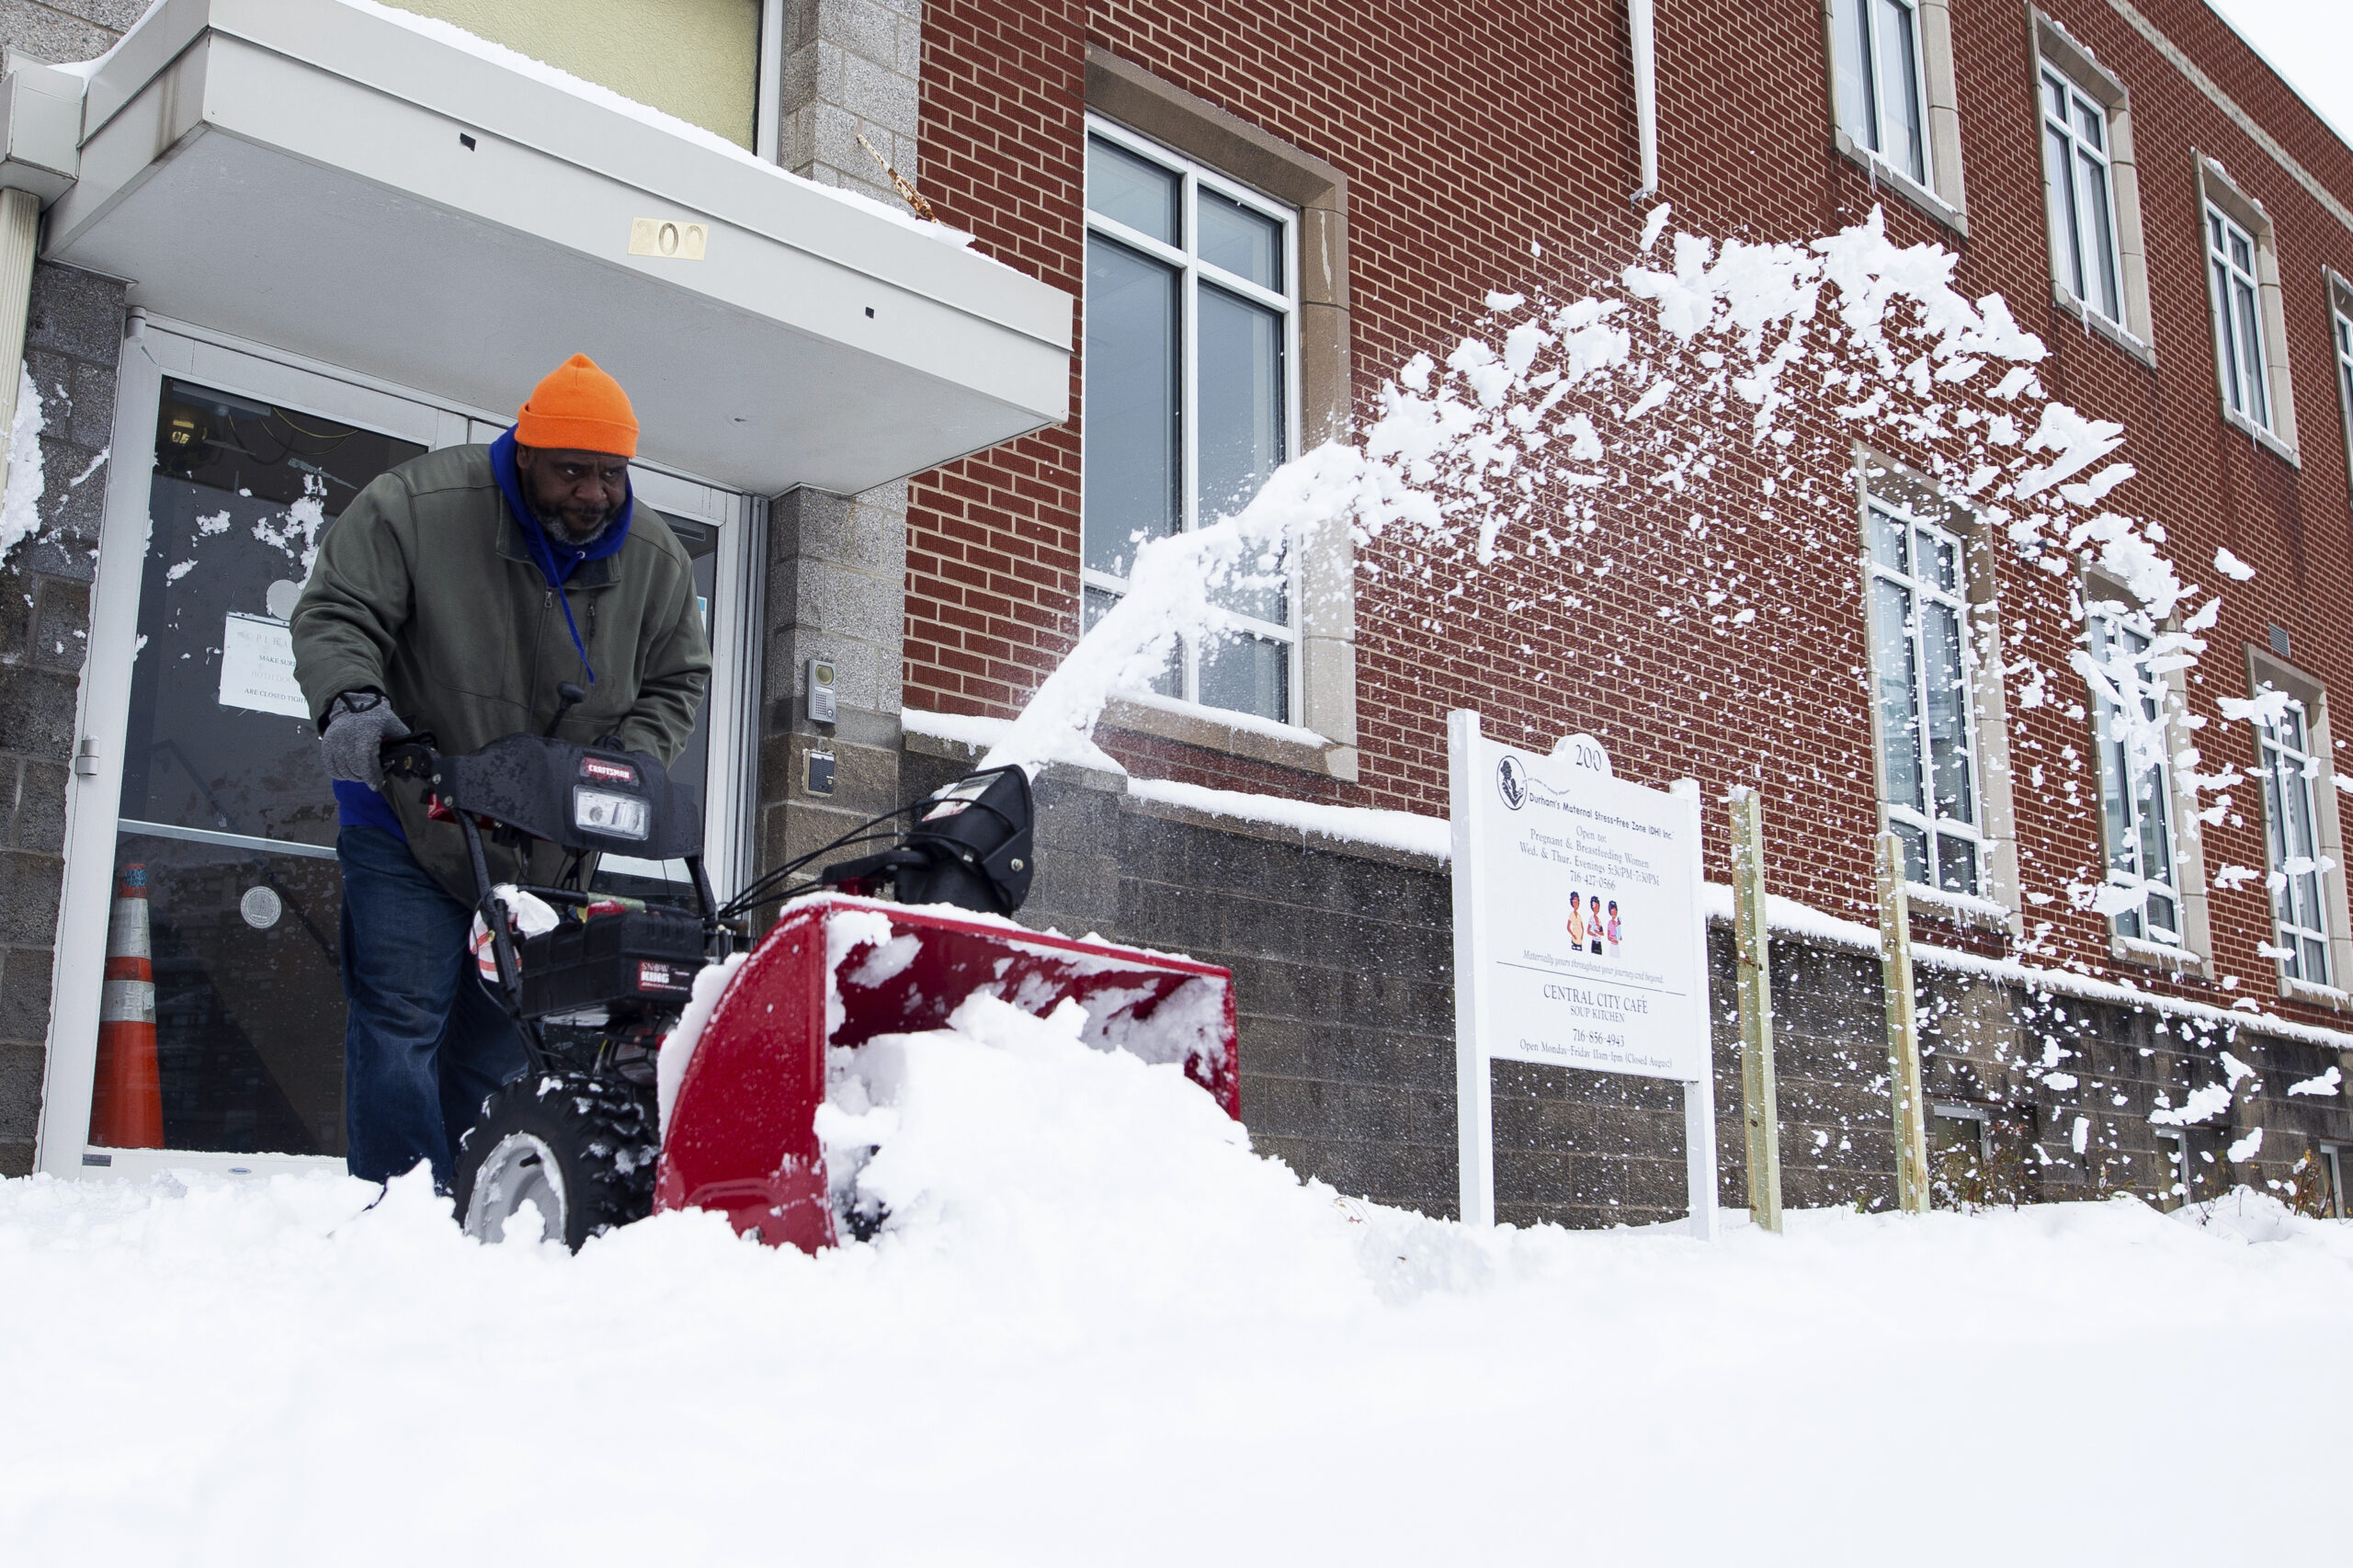 A man uses a snowblower to clear the sidewalk. There's a considerable amount of snow on the ground.